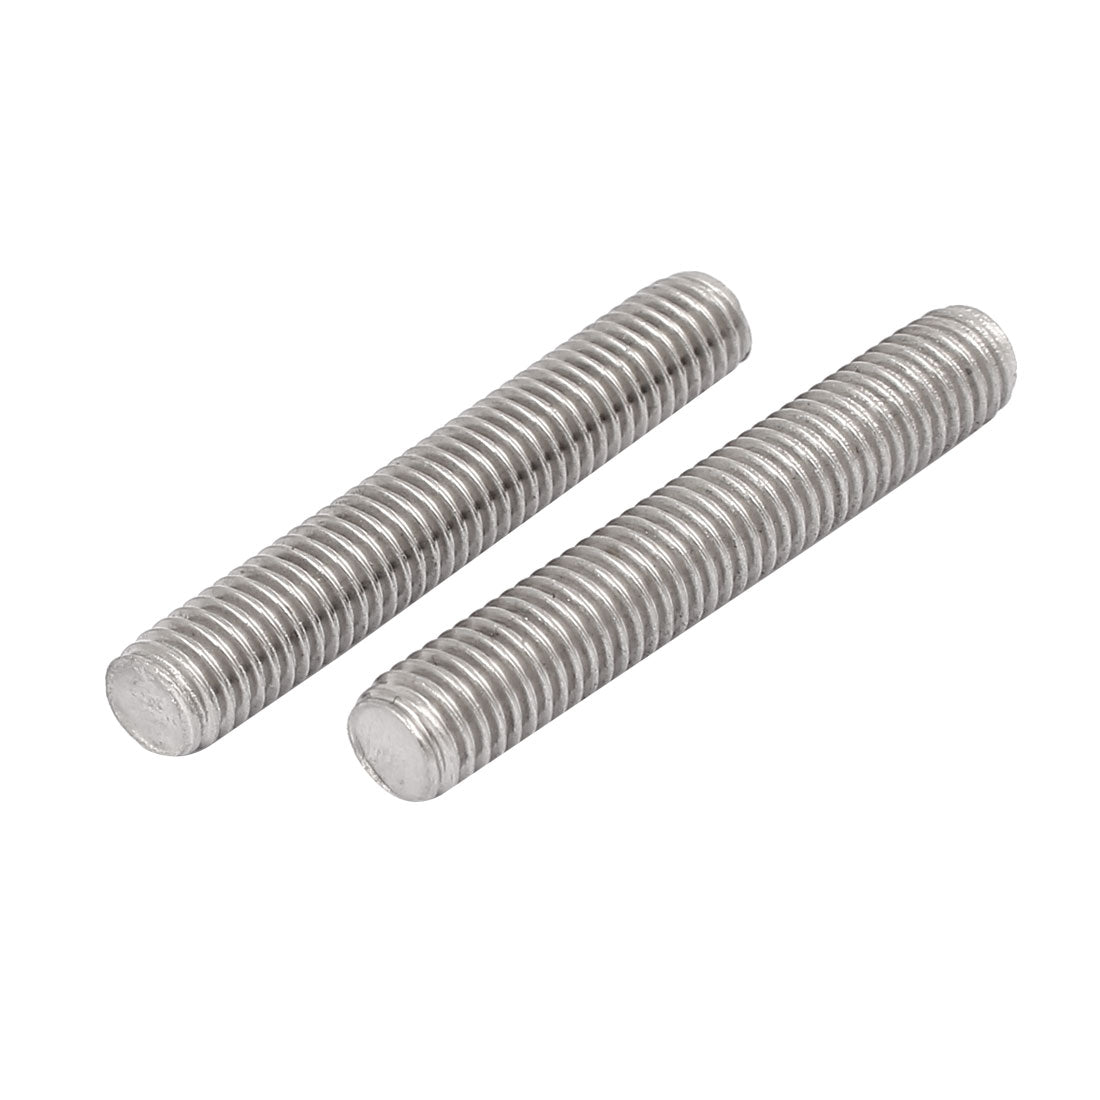 uxcell Uxcell M8 x 50mm 1.25mm Pitch 304 Stainless Steel Fully Threaded Rods Fasteners 20 Pcs